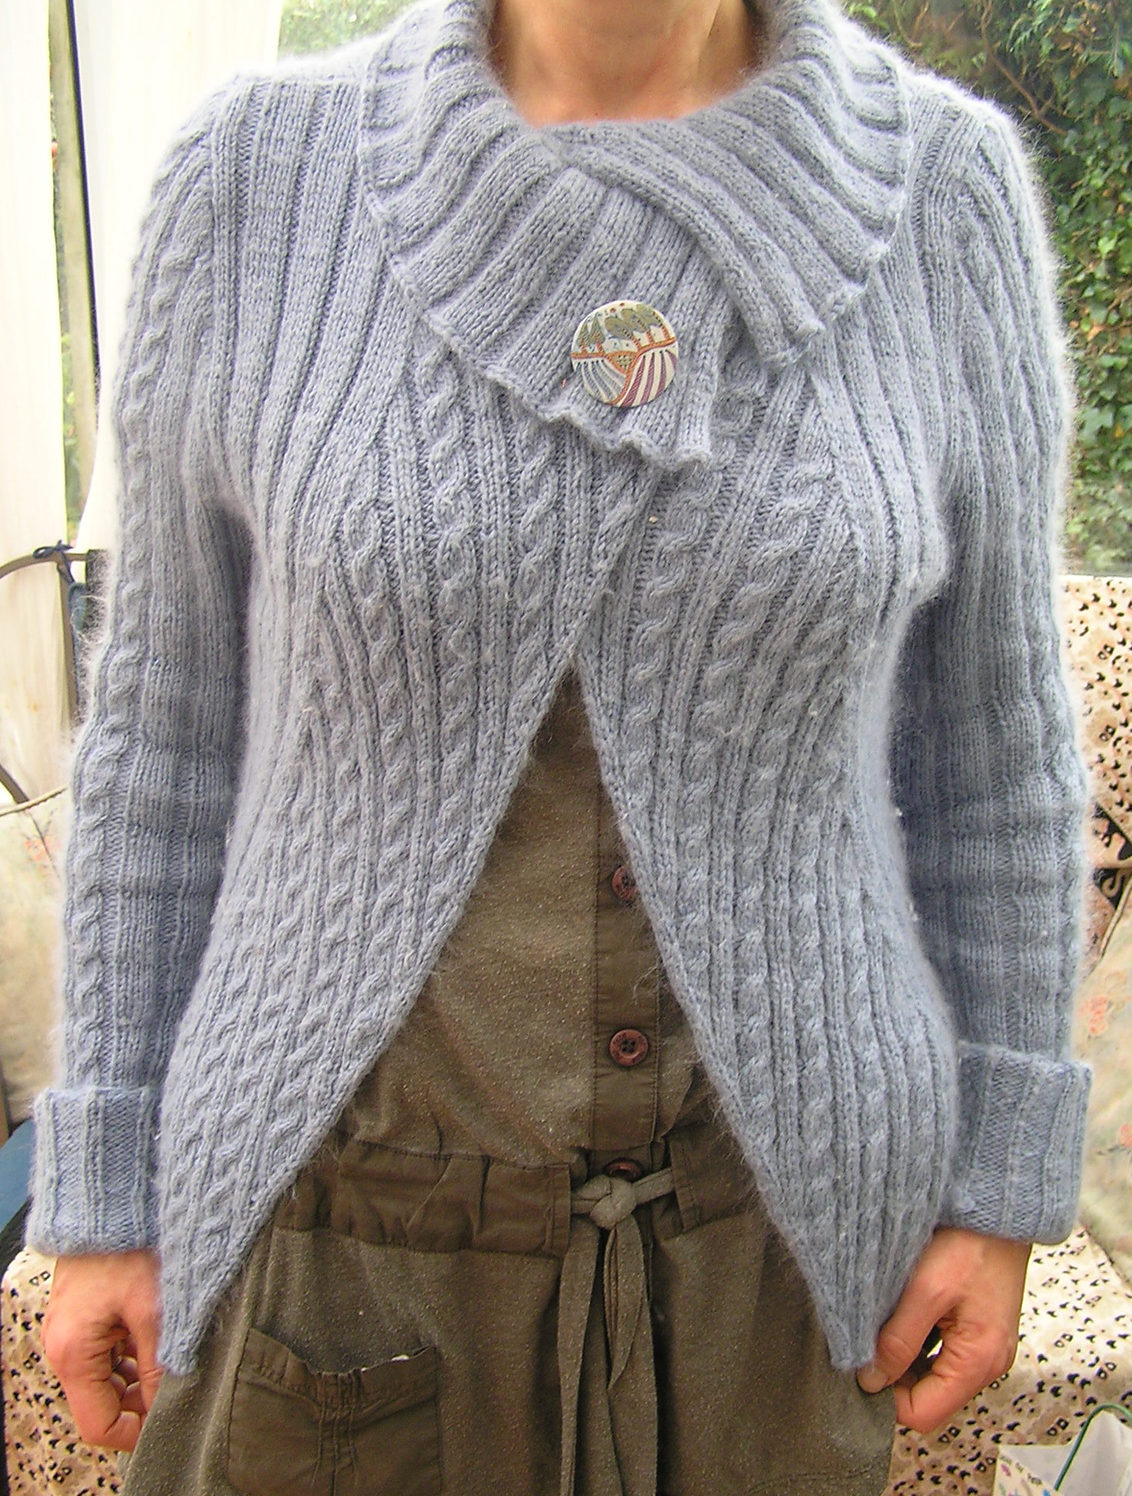 Free Knitting Patterns For Shrugs And Wraps Wrap Cardigan Knitting Patterns In The Loop Knitting